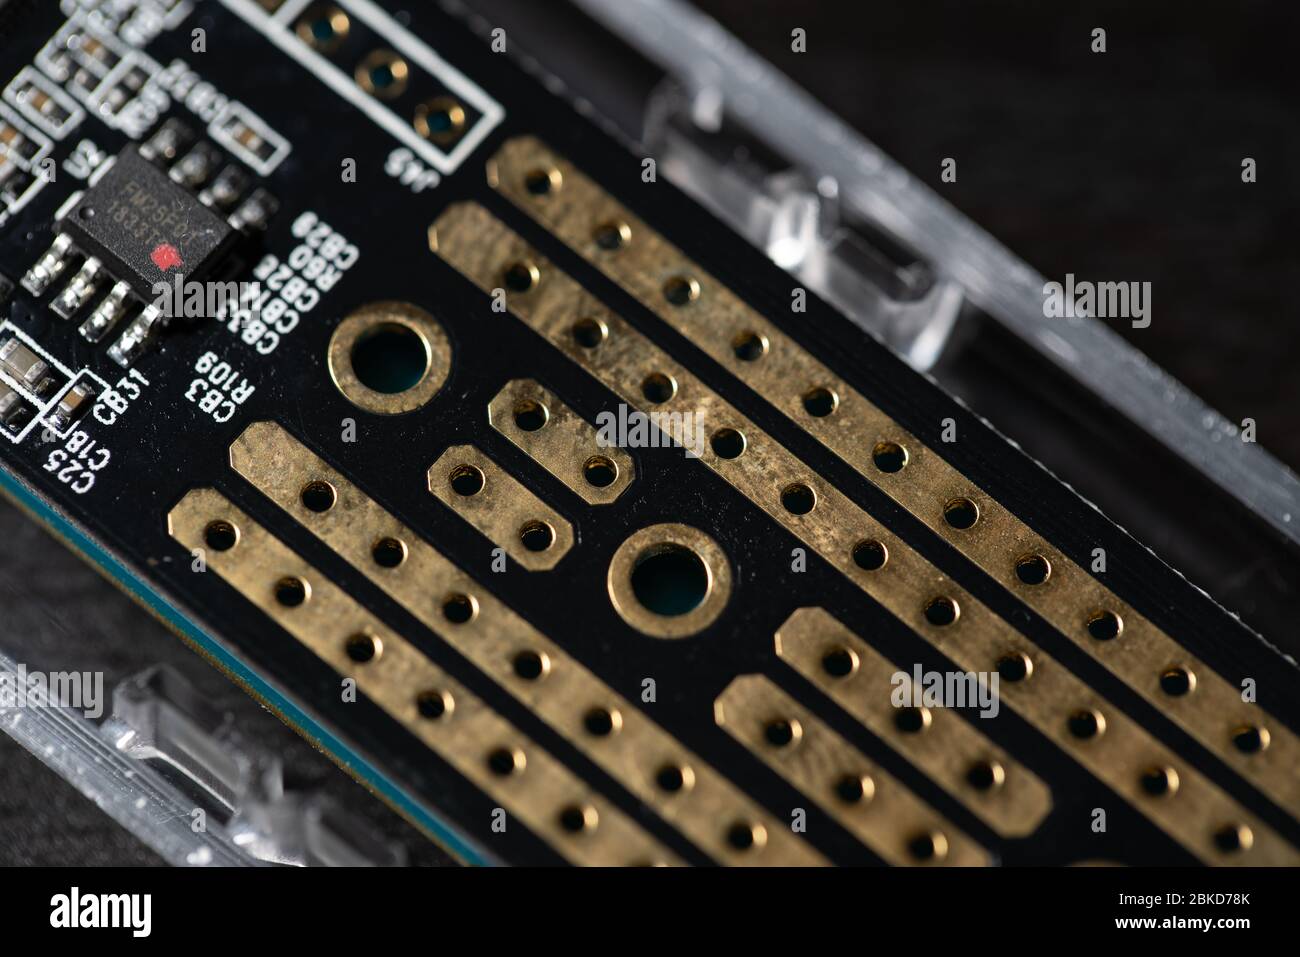 A motherboard is one of the most essential parts of a computer system. Stock Photo